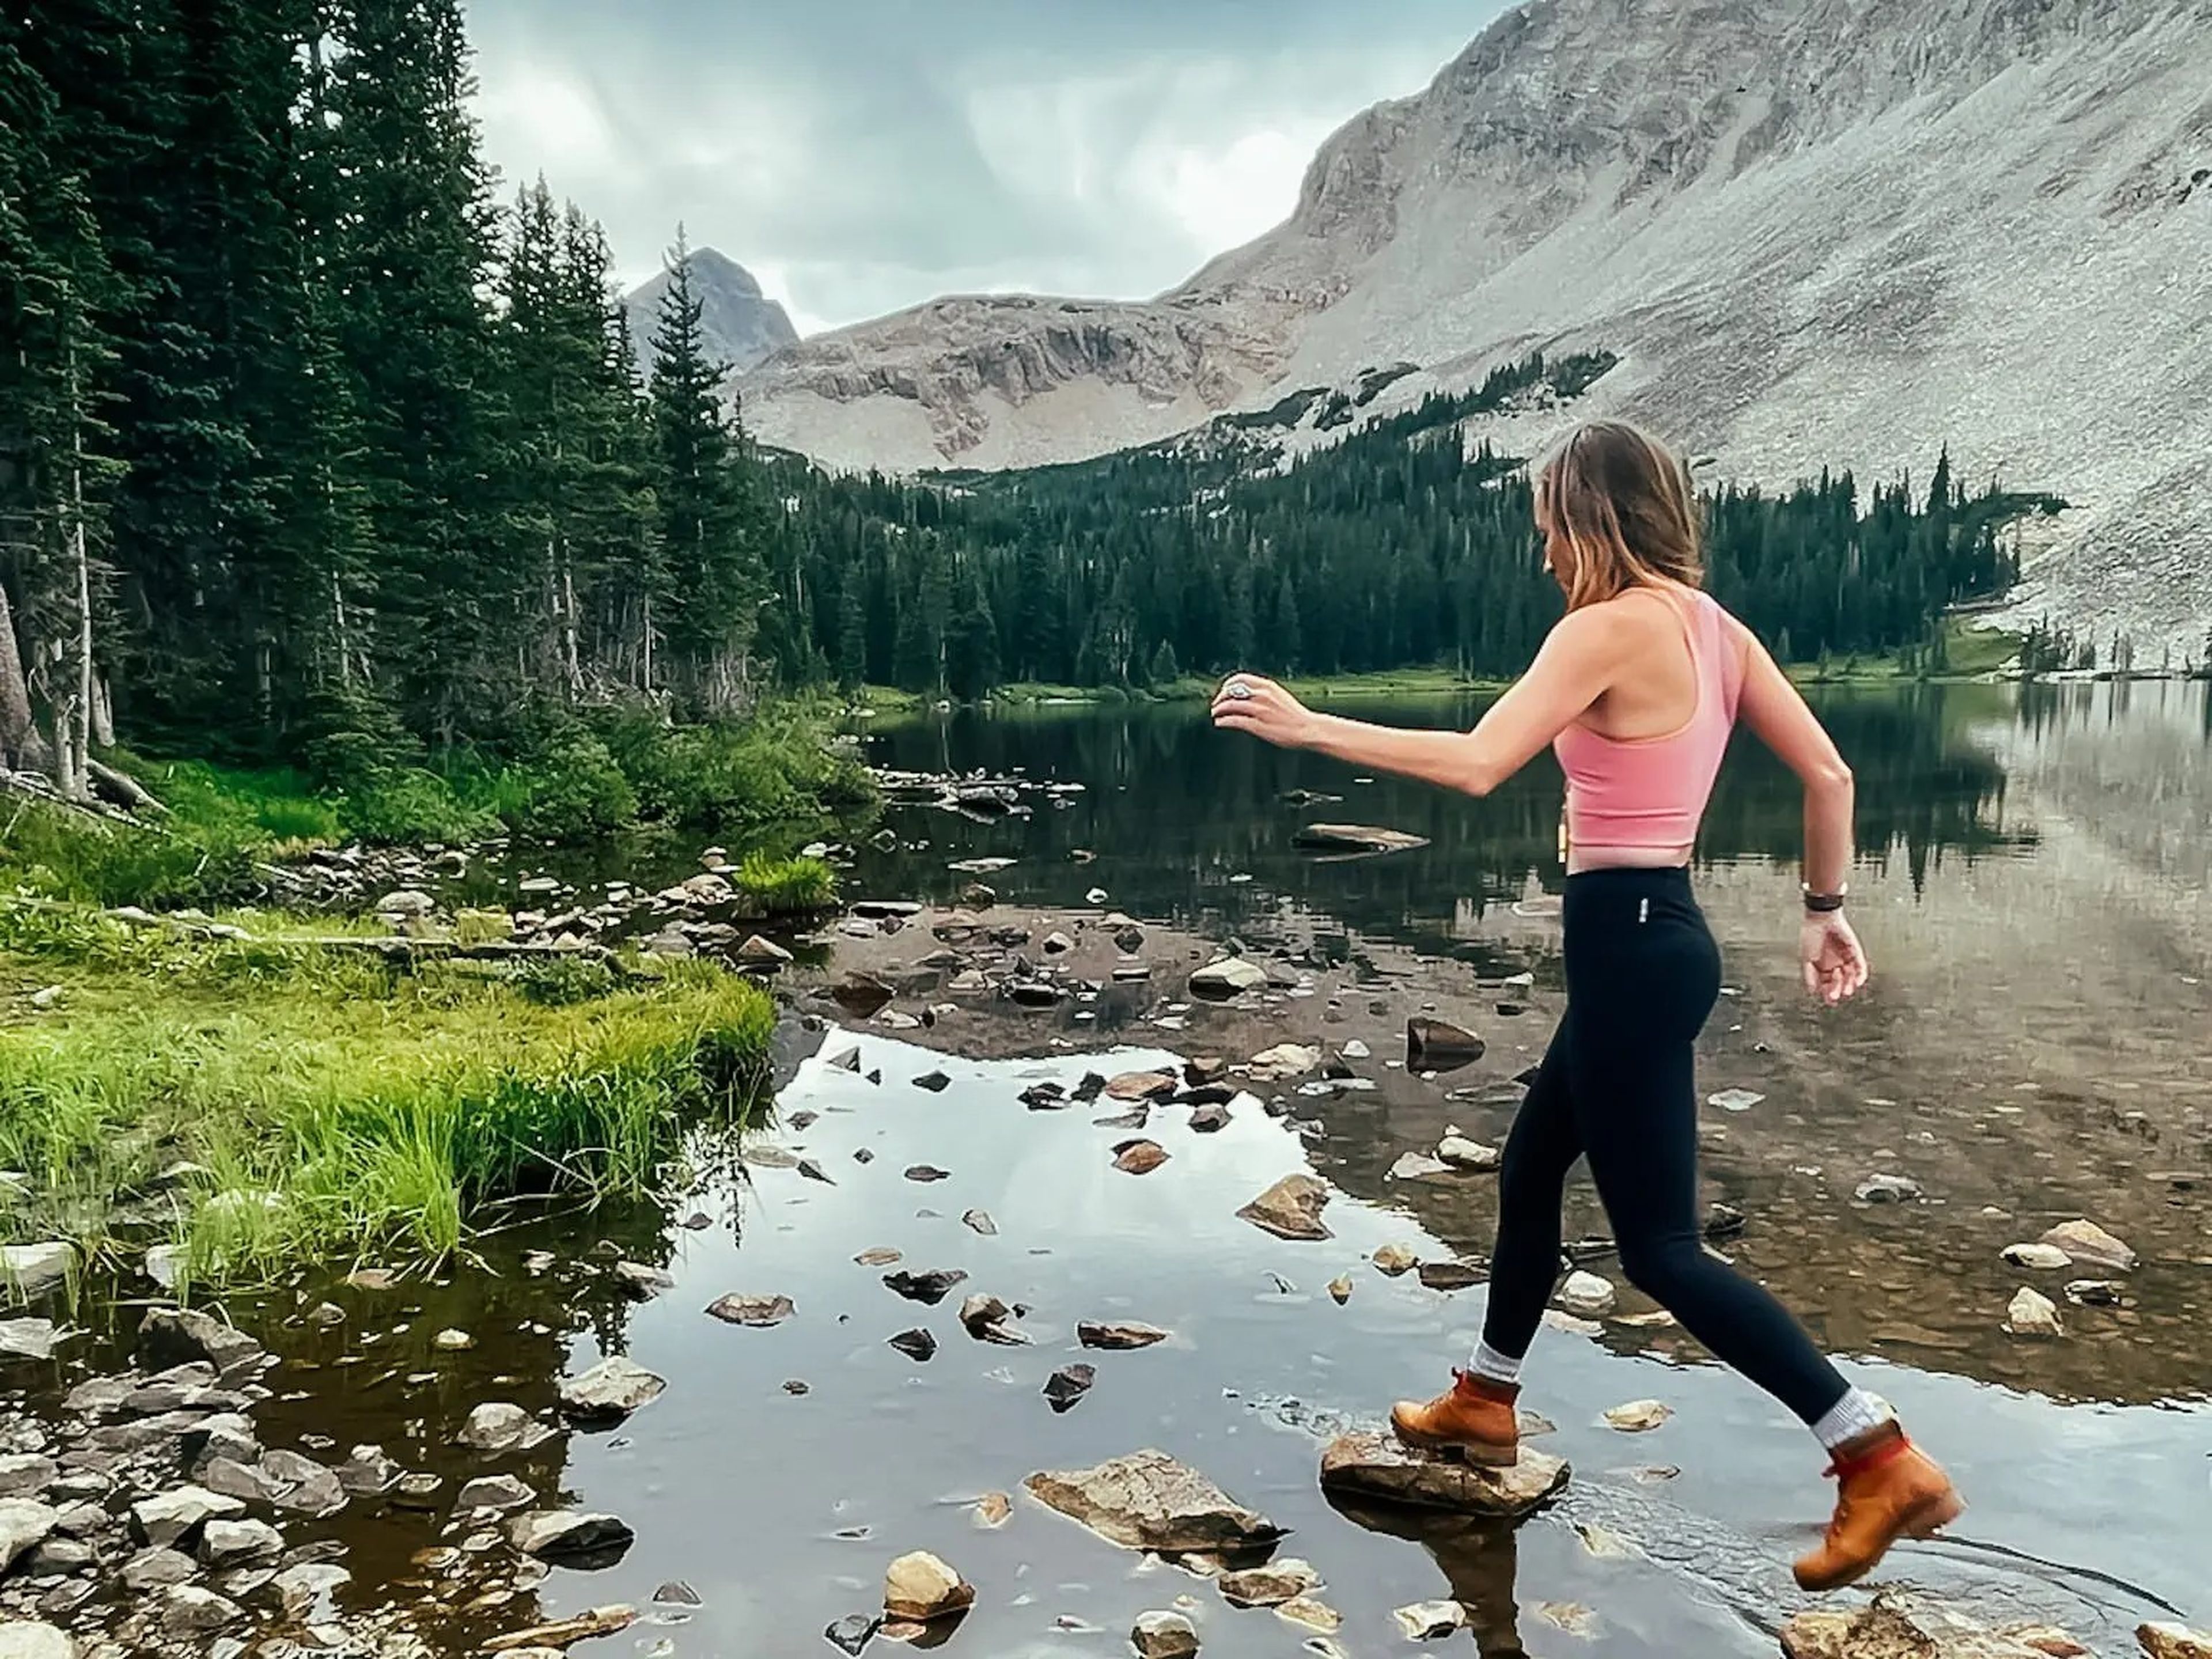 Emily, wearing a pink tank top, black leggings, and boots, walks across the rocks in a lake. Behind her are tall trees and mountains.